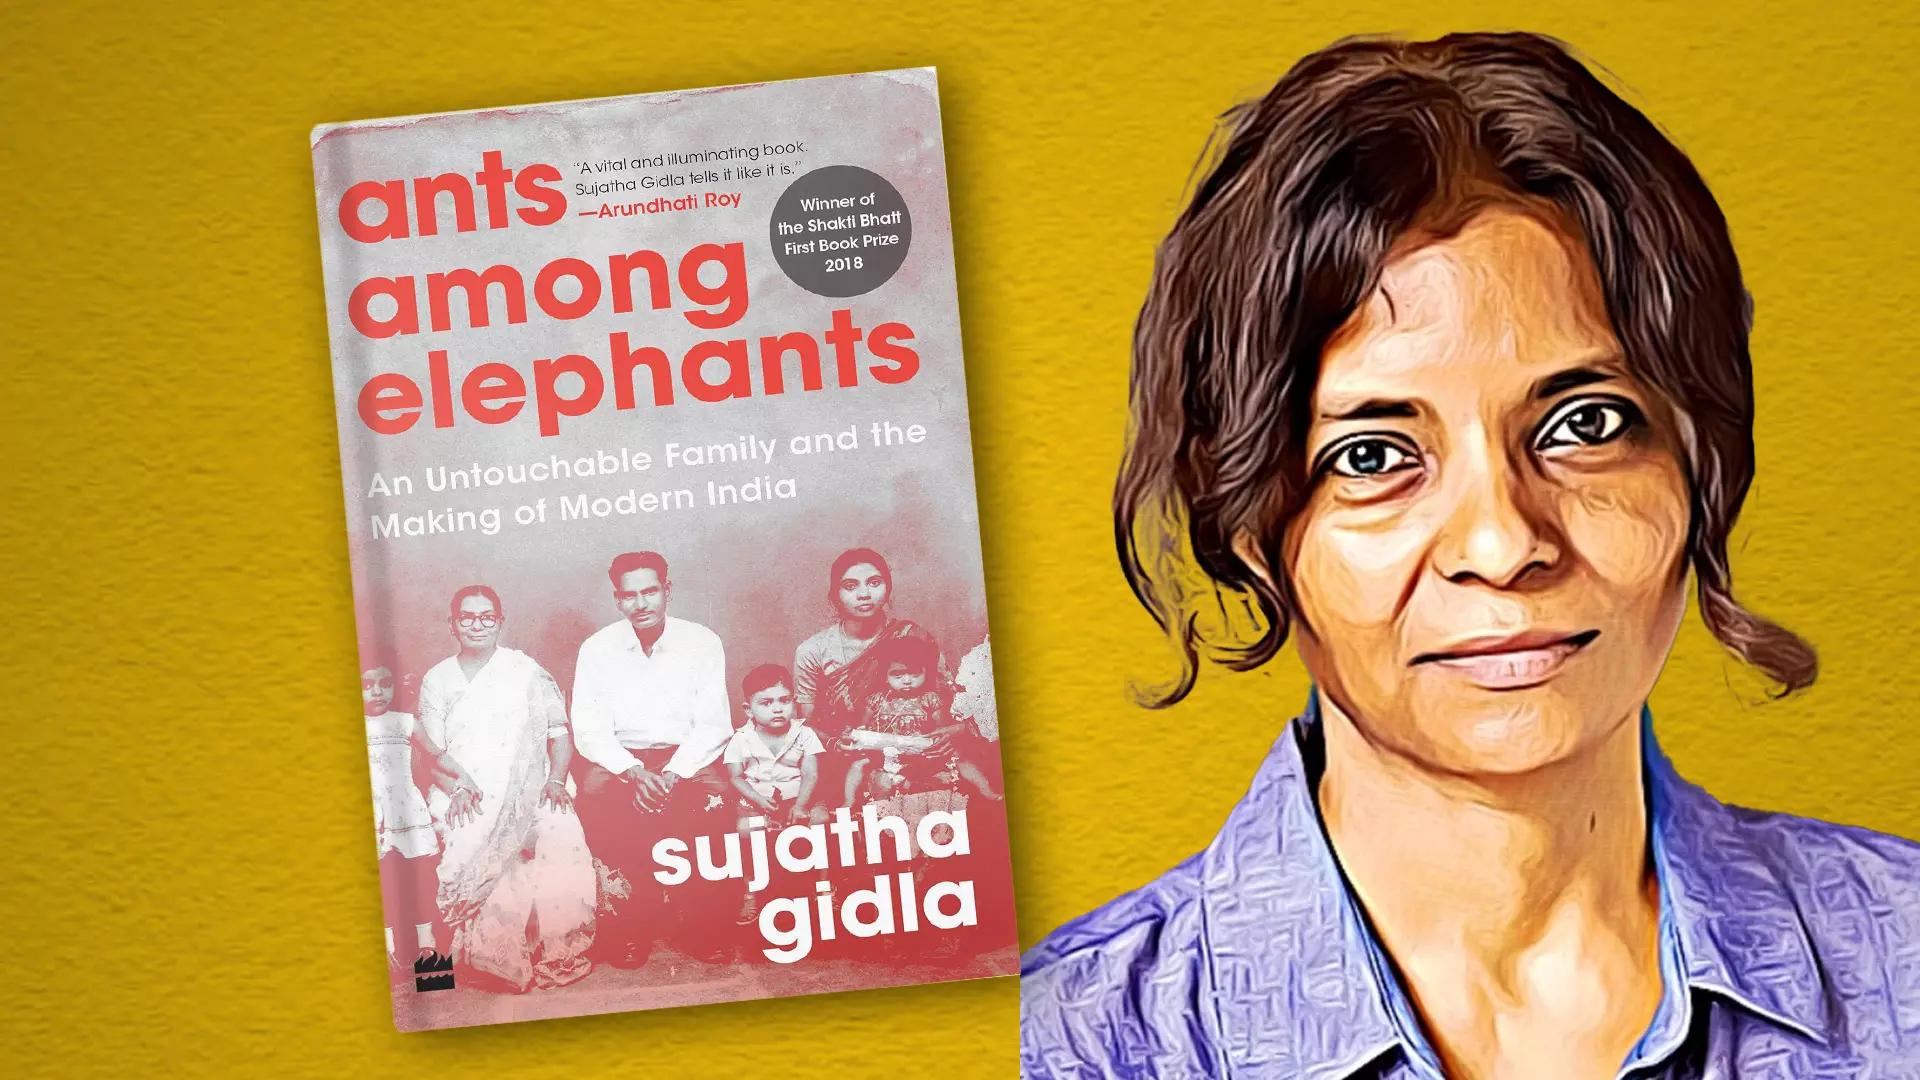 For Ants Among Elephants: An Untouchable Family and the Making of Modern India writer Sujatha Gidla, her life was her caste, and her caste was her life.